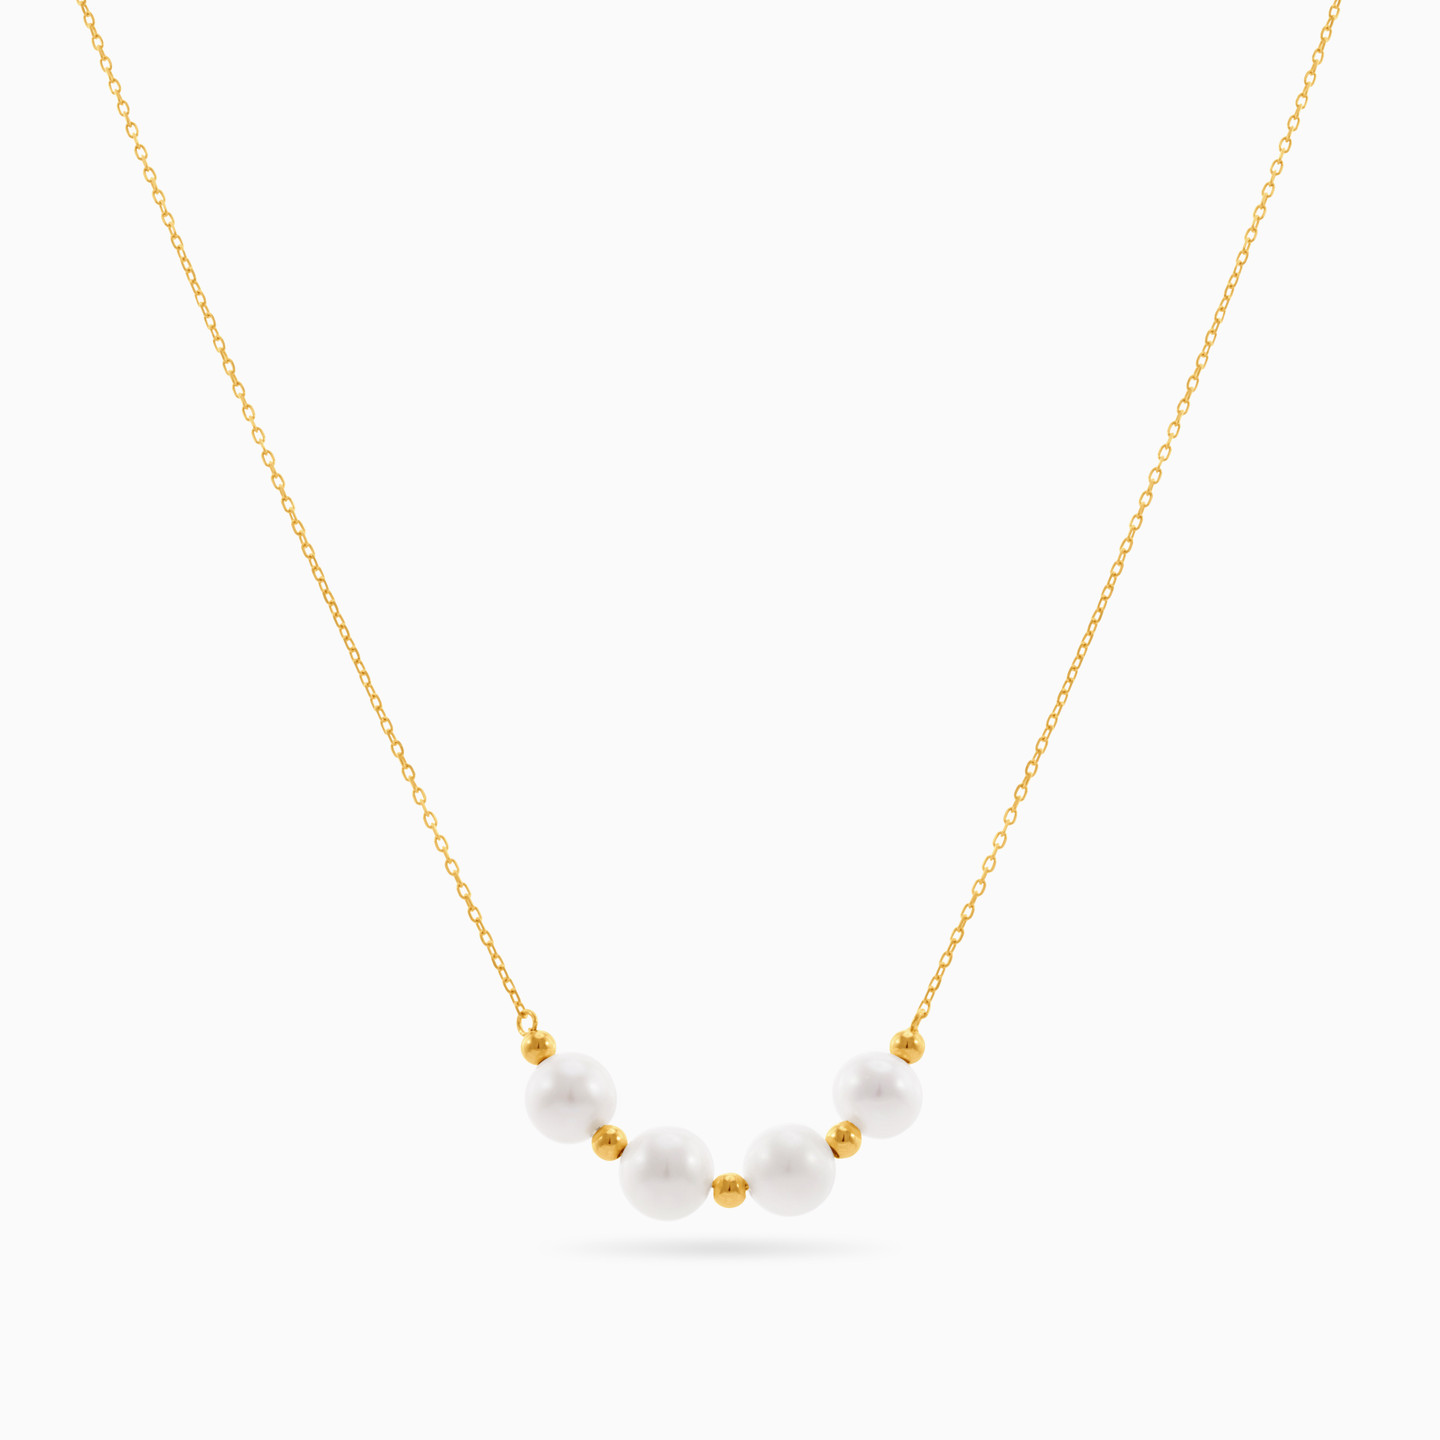 18K Gold Pearl Pendant Necklace - 3